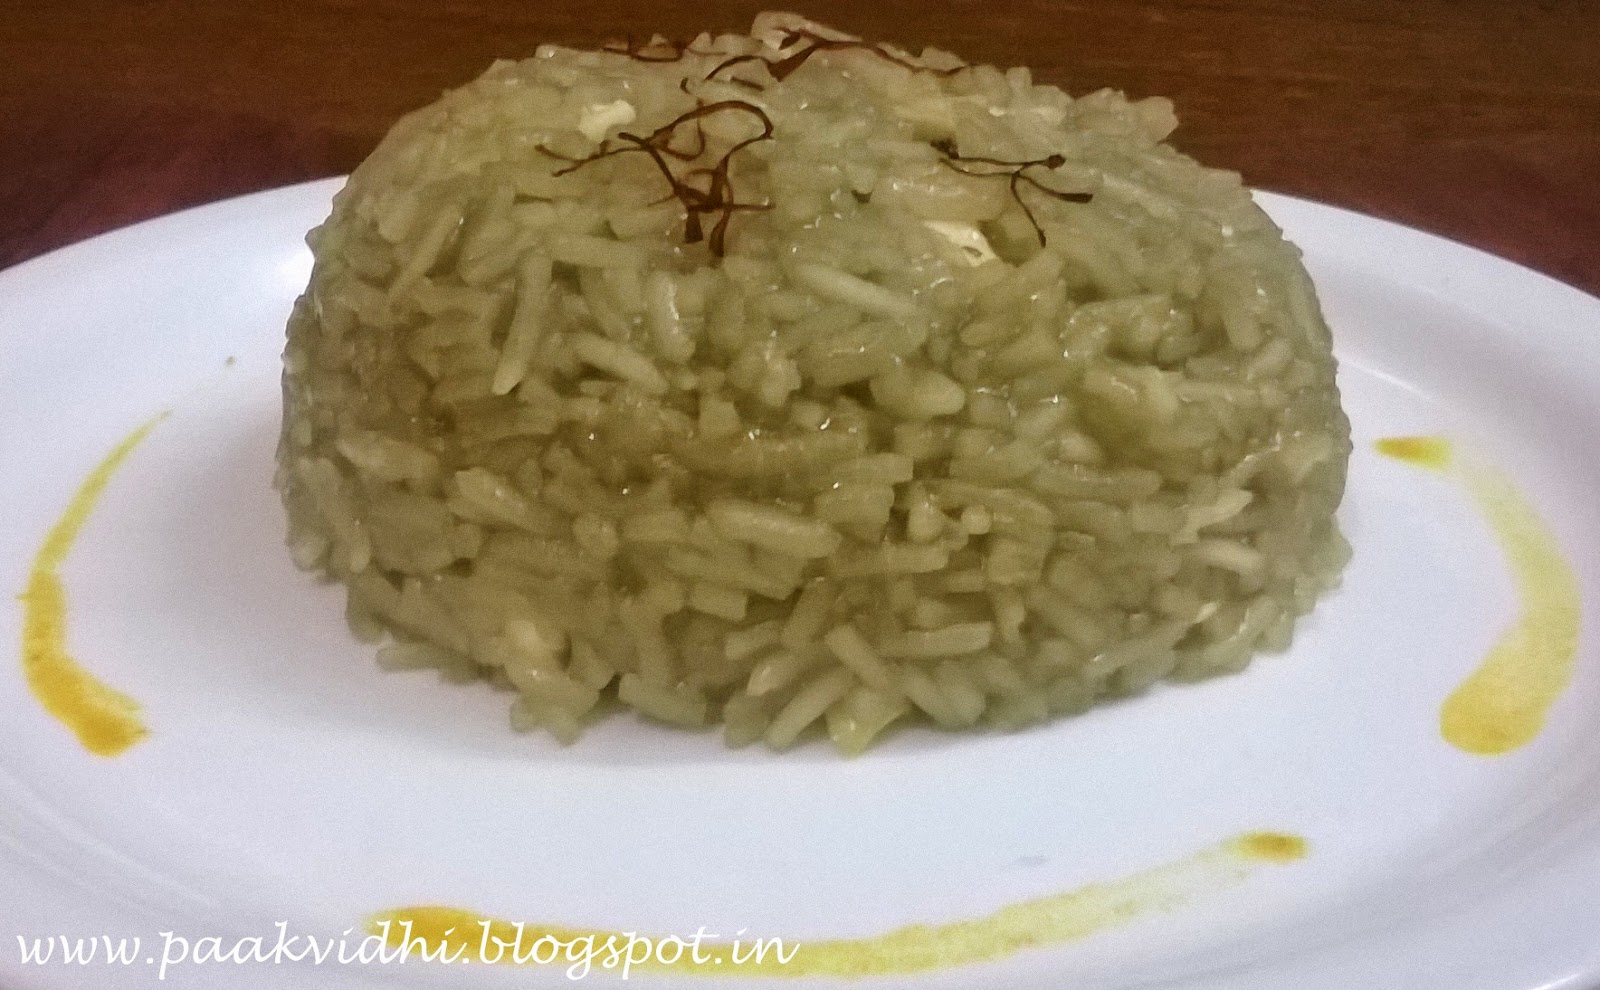 http://paakvidhi.blogspot.in/2014/05/gur-wale-chaawal-jaggery-rice.html